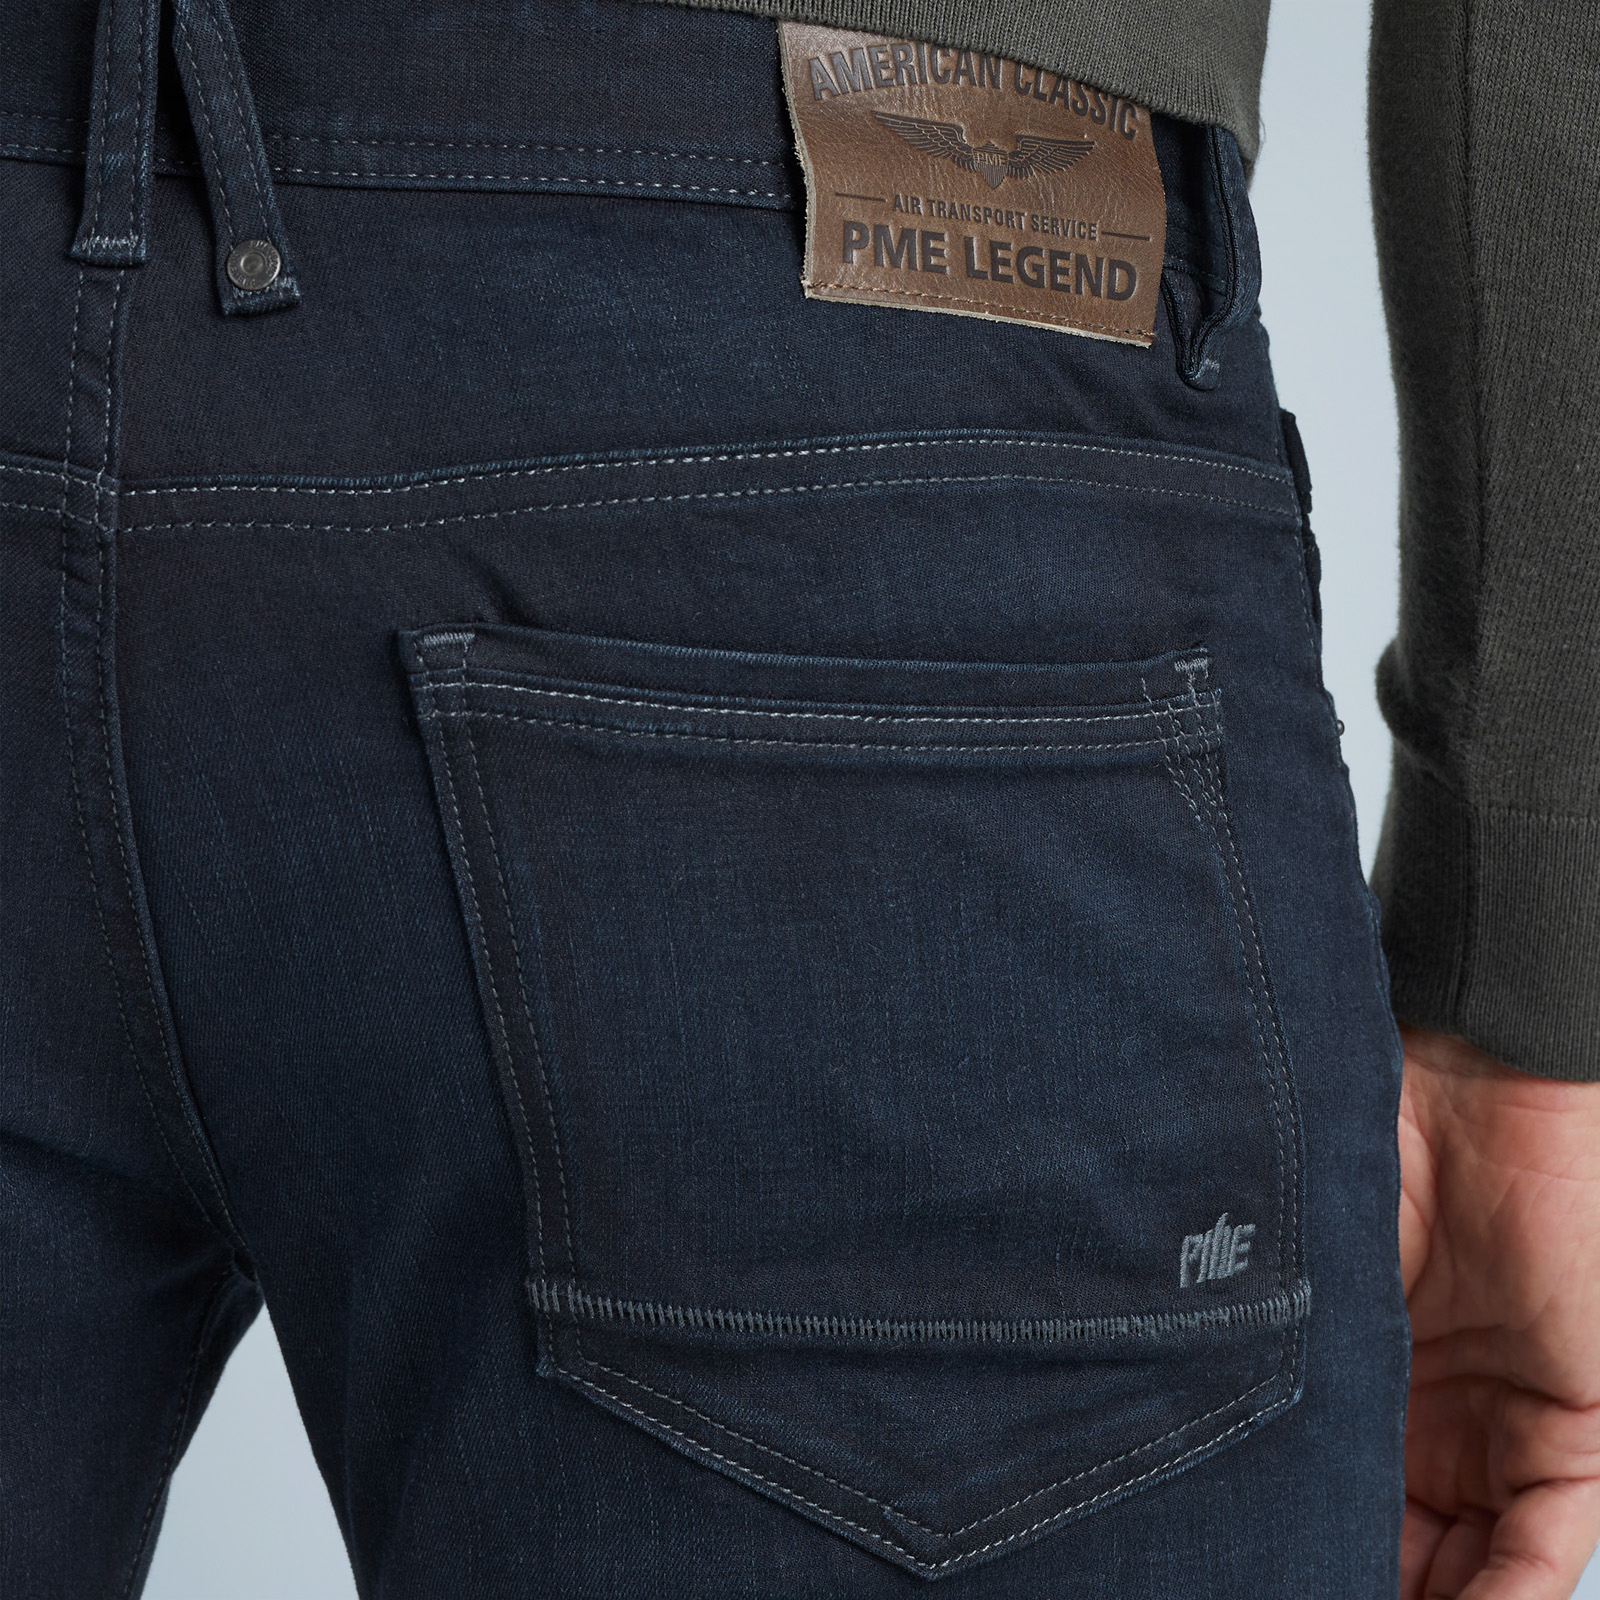 PME LEGEND | Tailwheel slim jeans fit | shipping and Free returns